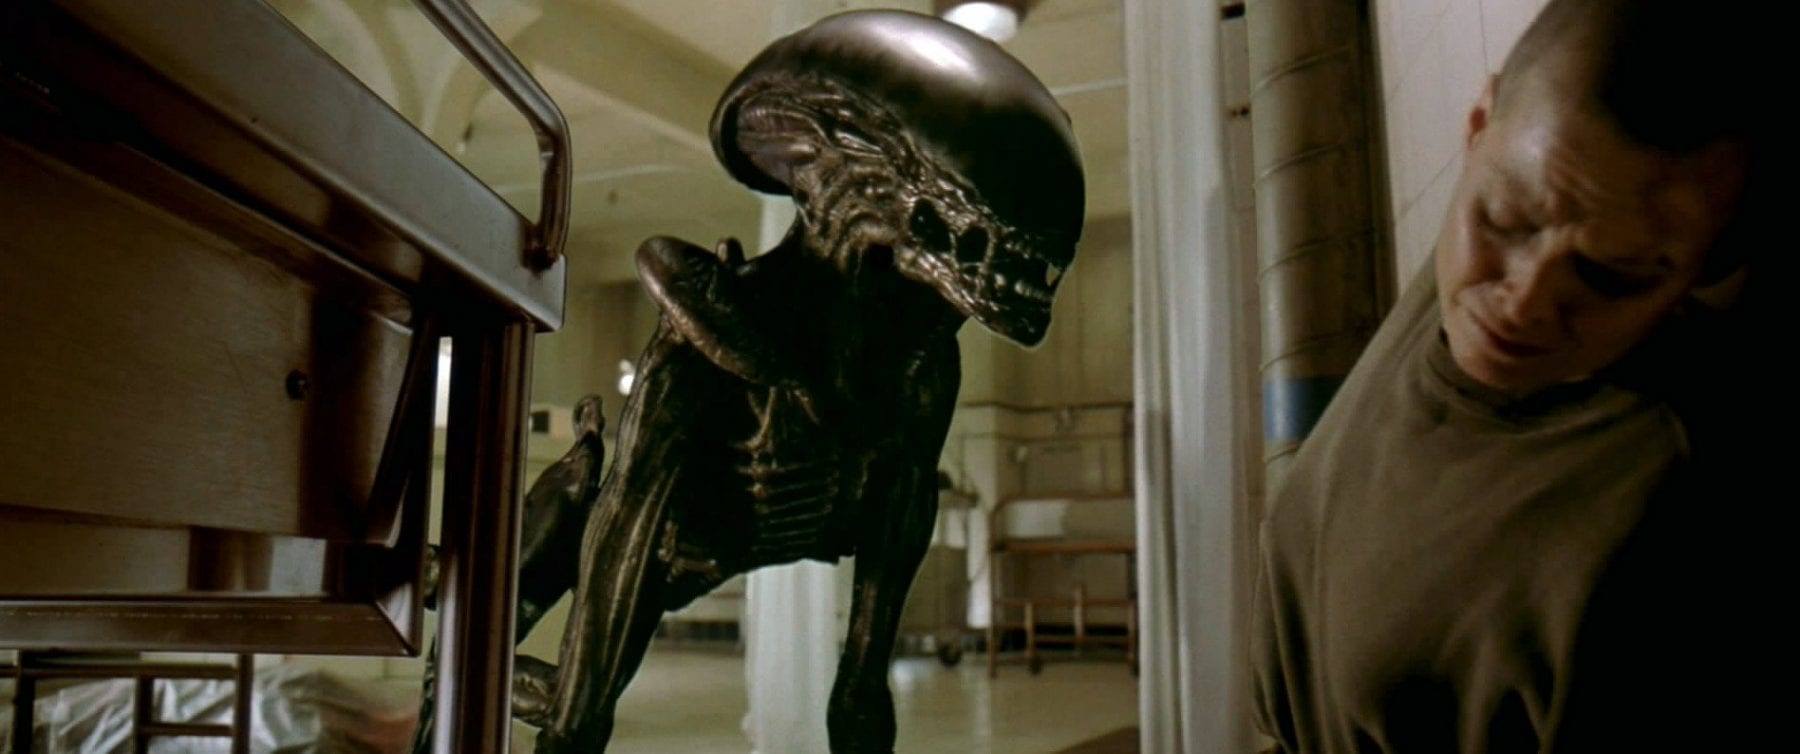 Alien 3 Assembly Cut Delivers A More Satisfying Trilogy